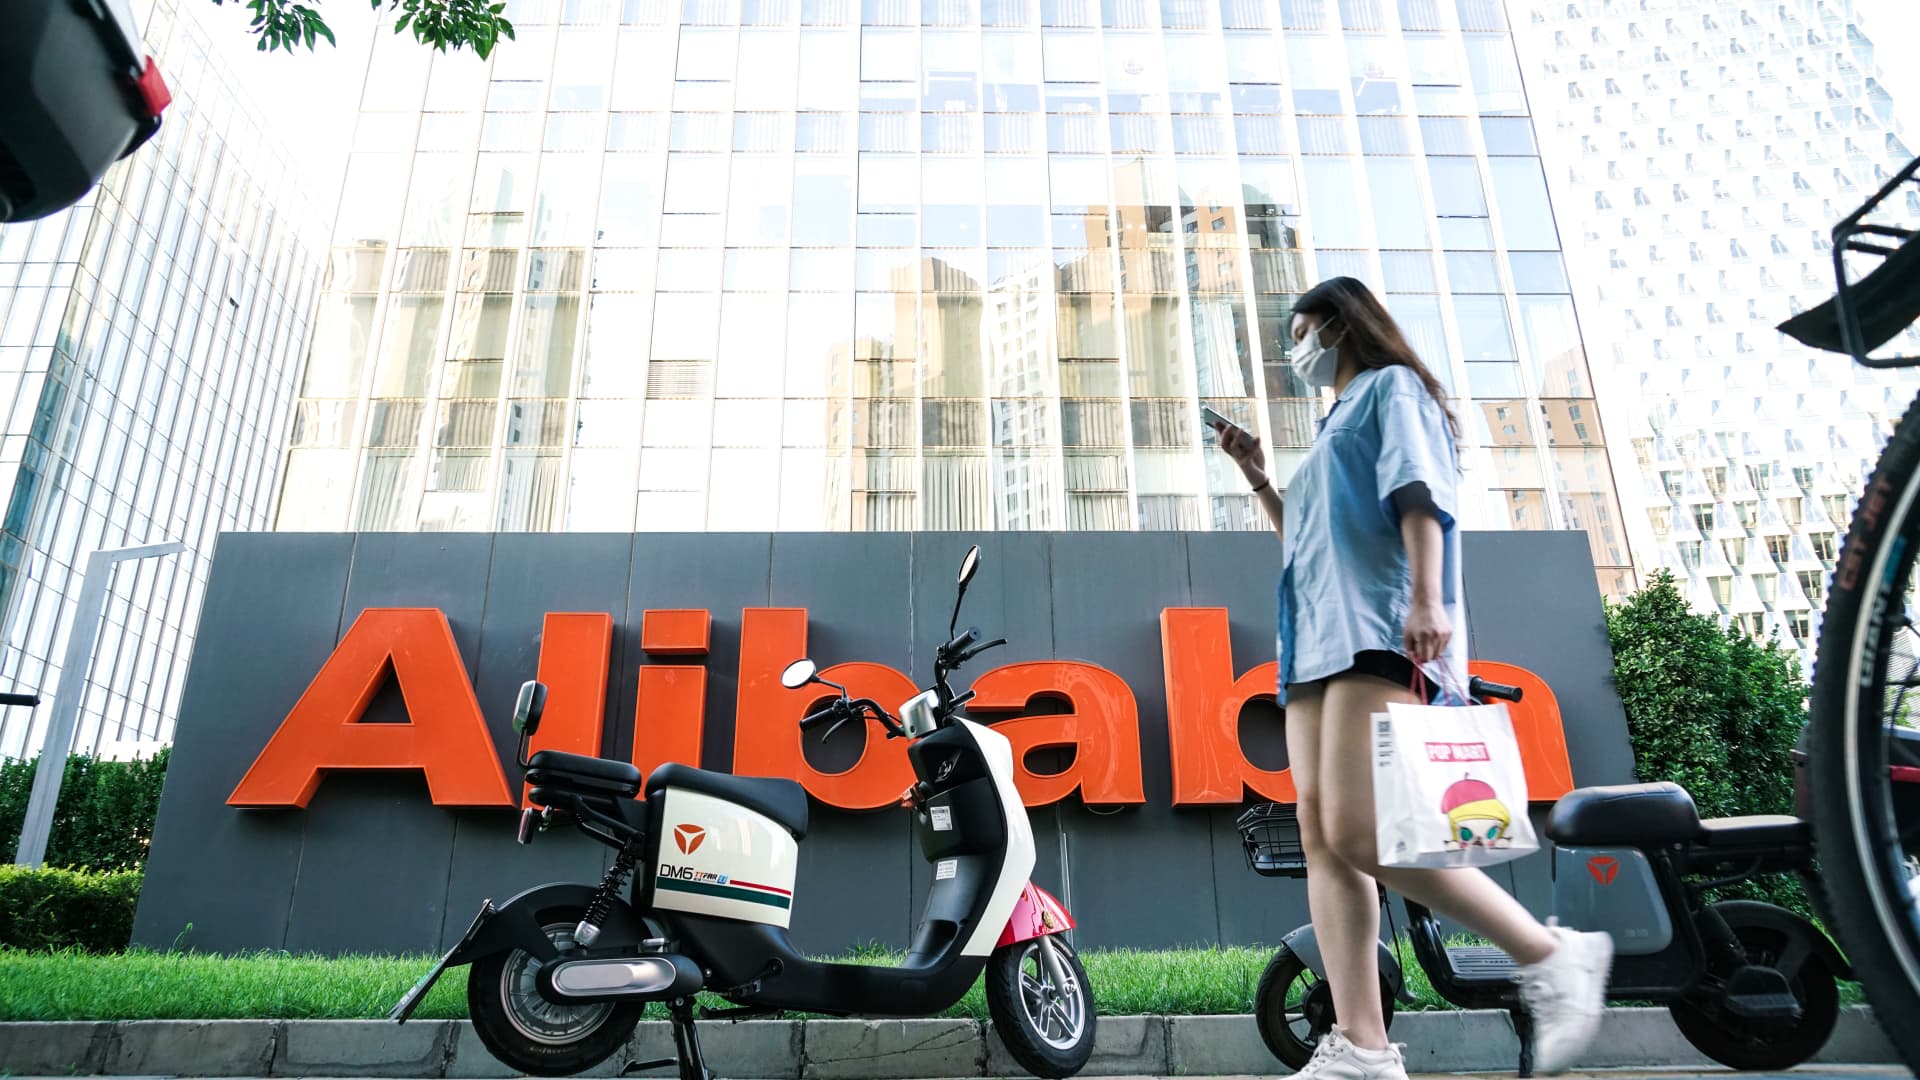 Alibaba states it will split into 6 units that can increase resources and IPO